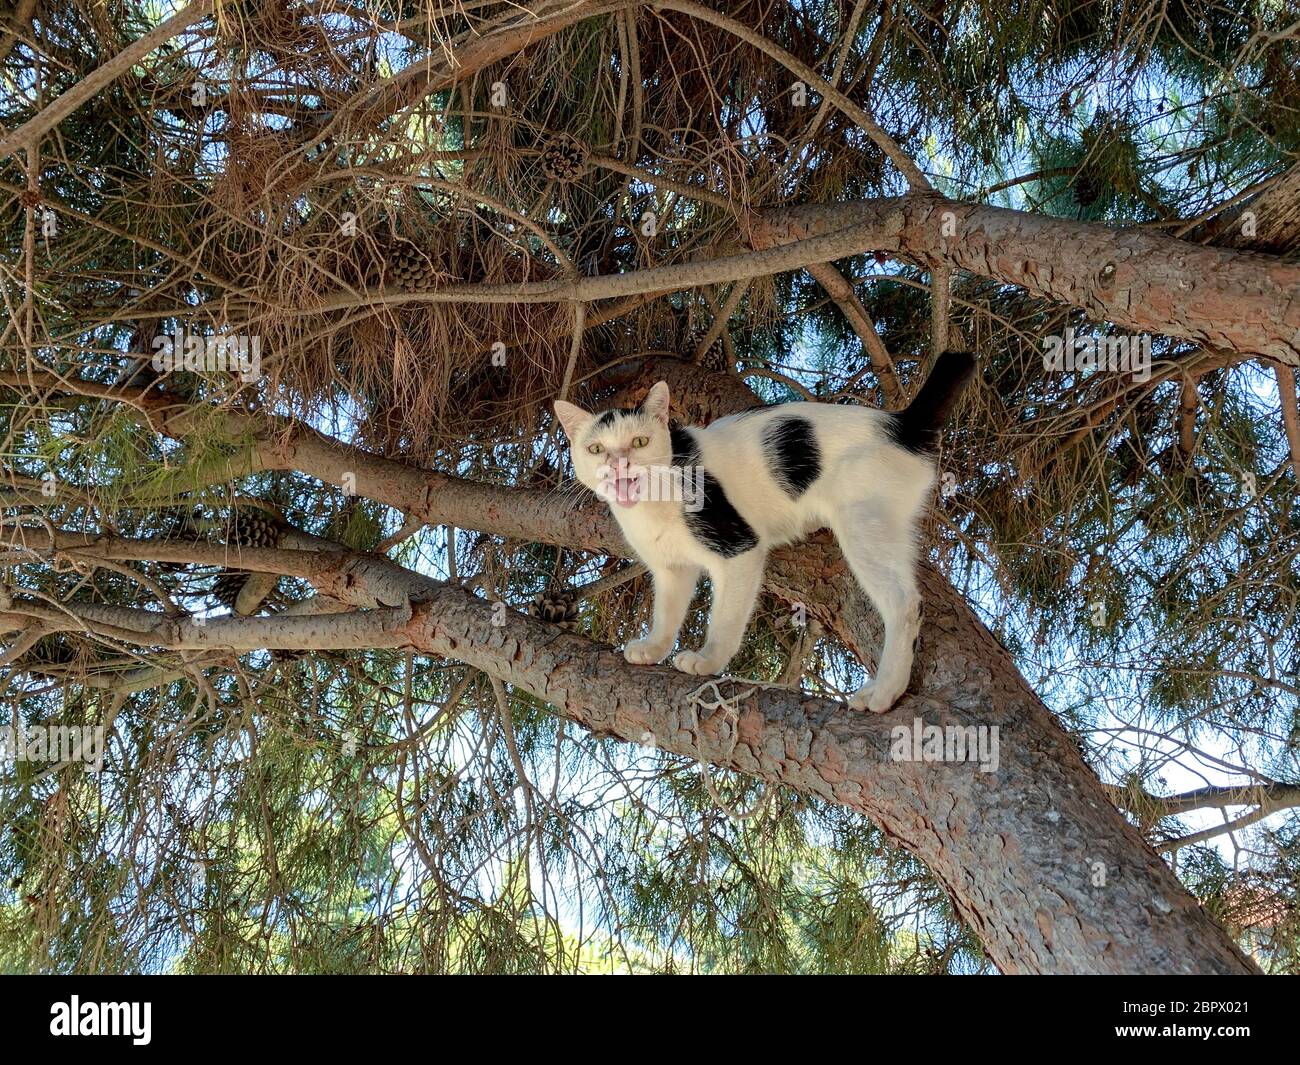 A black and white cat stands on a pine branch and meows with its mouth open. Stock Photo